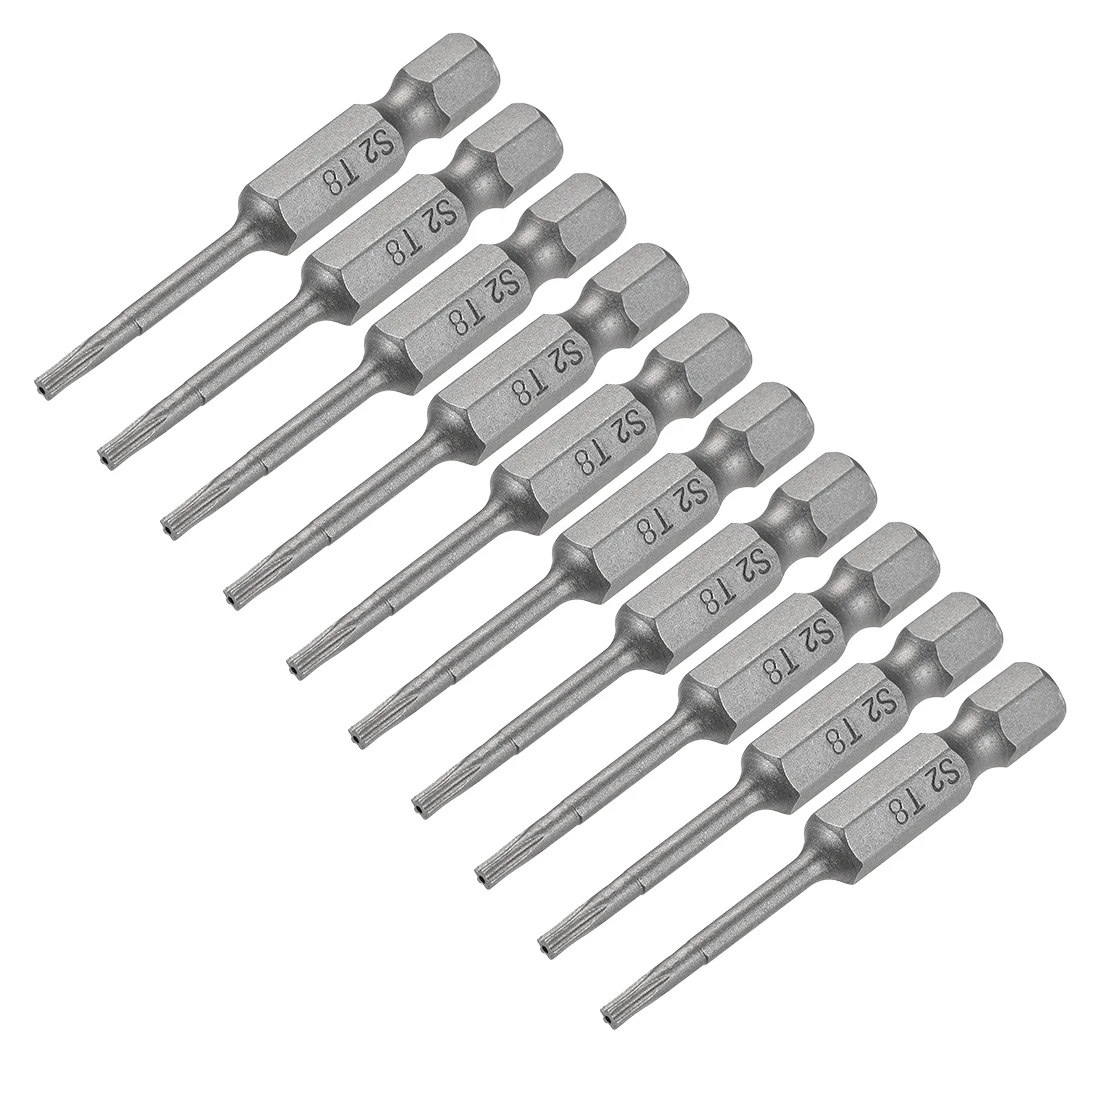 

uxcell 50mm Long 1/4inch Hex Shank T8 Torx Security Star Screwdriver Bits S2 High Alloy Steel 10pcs